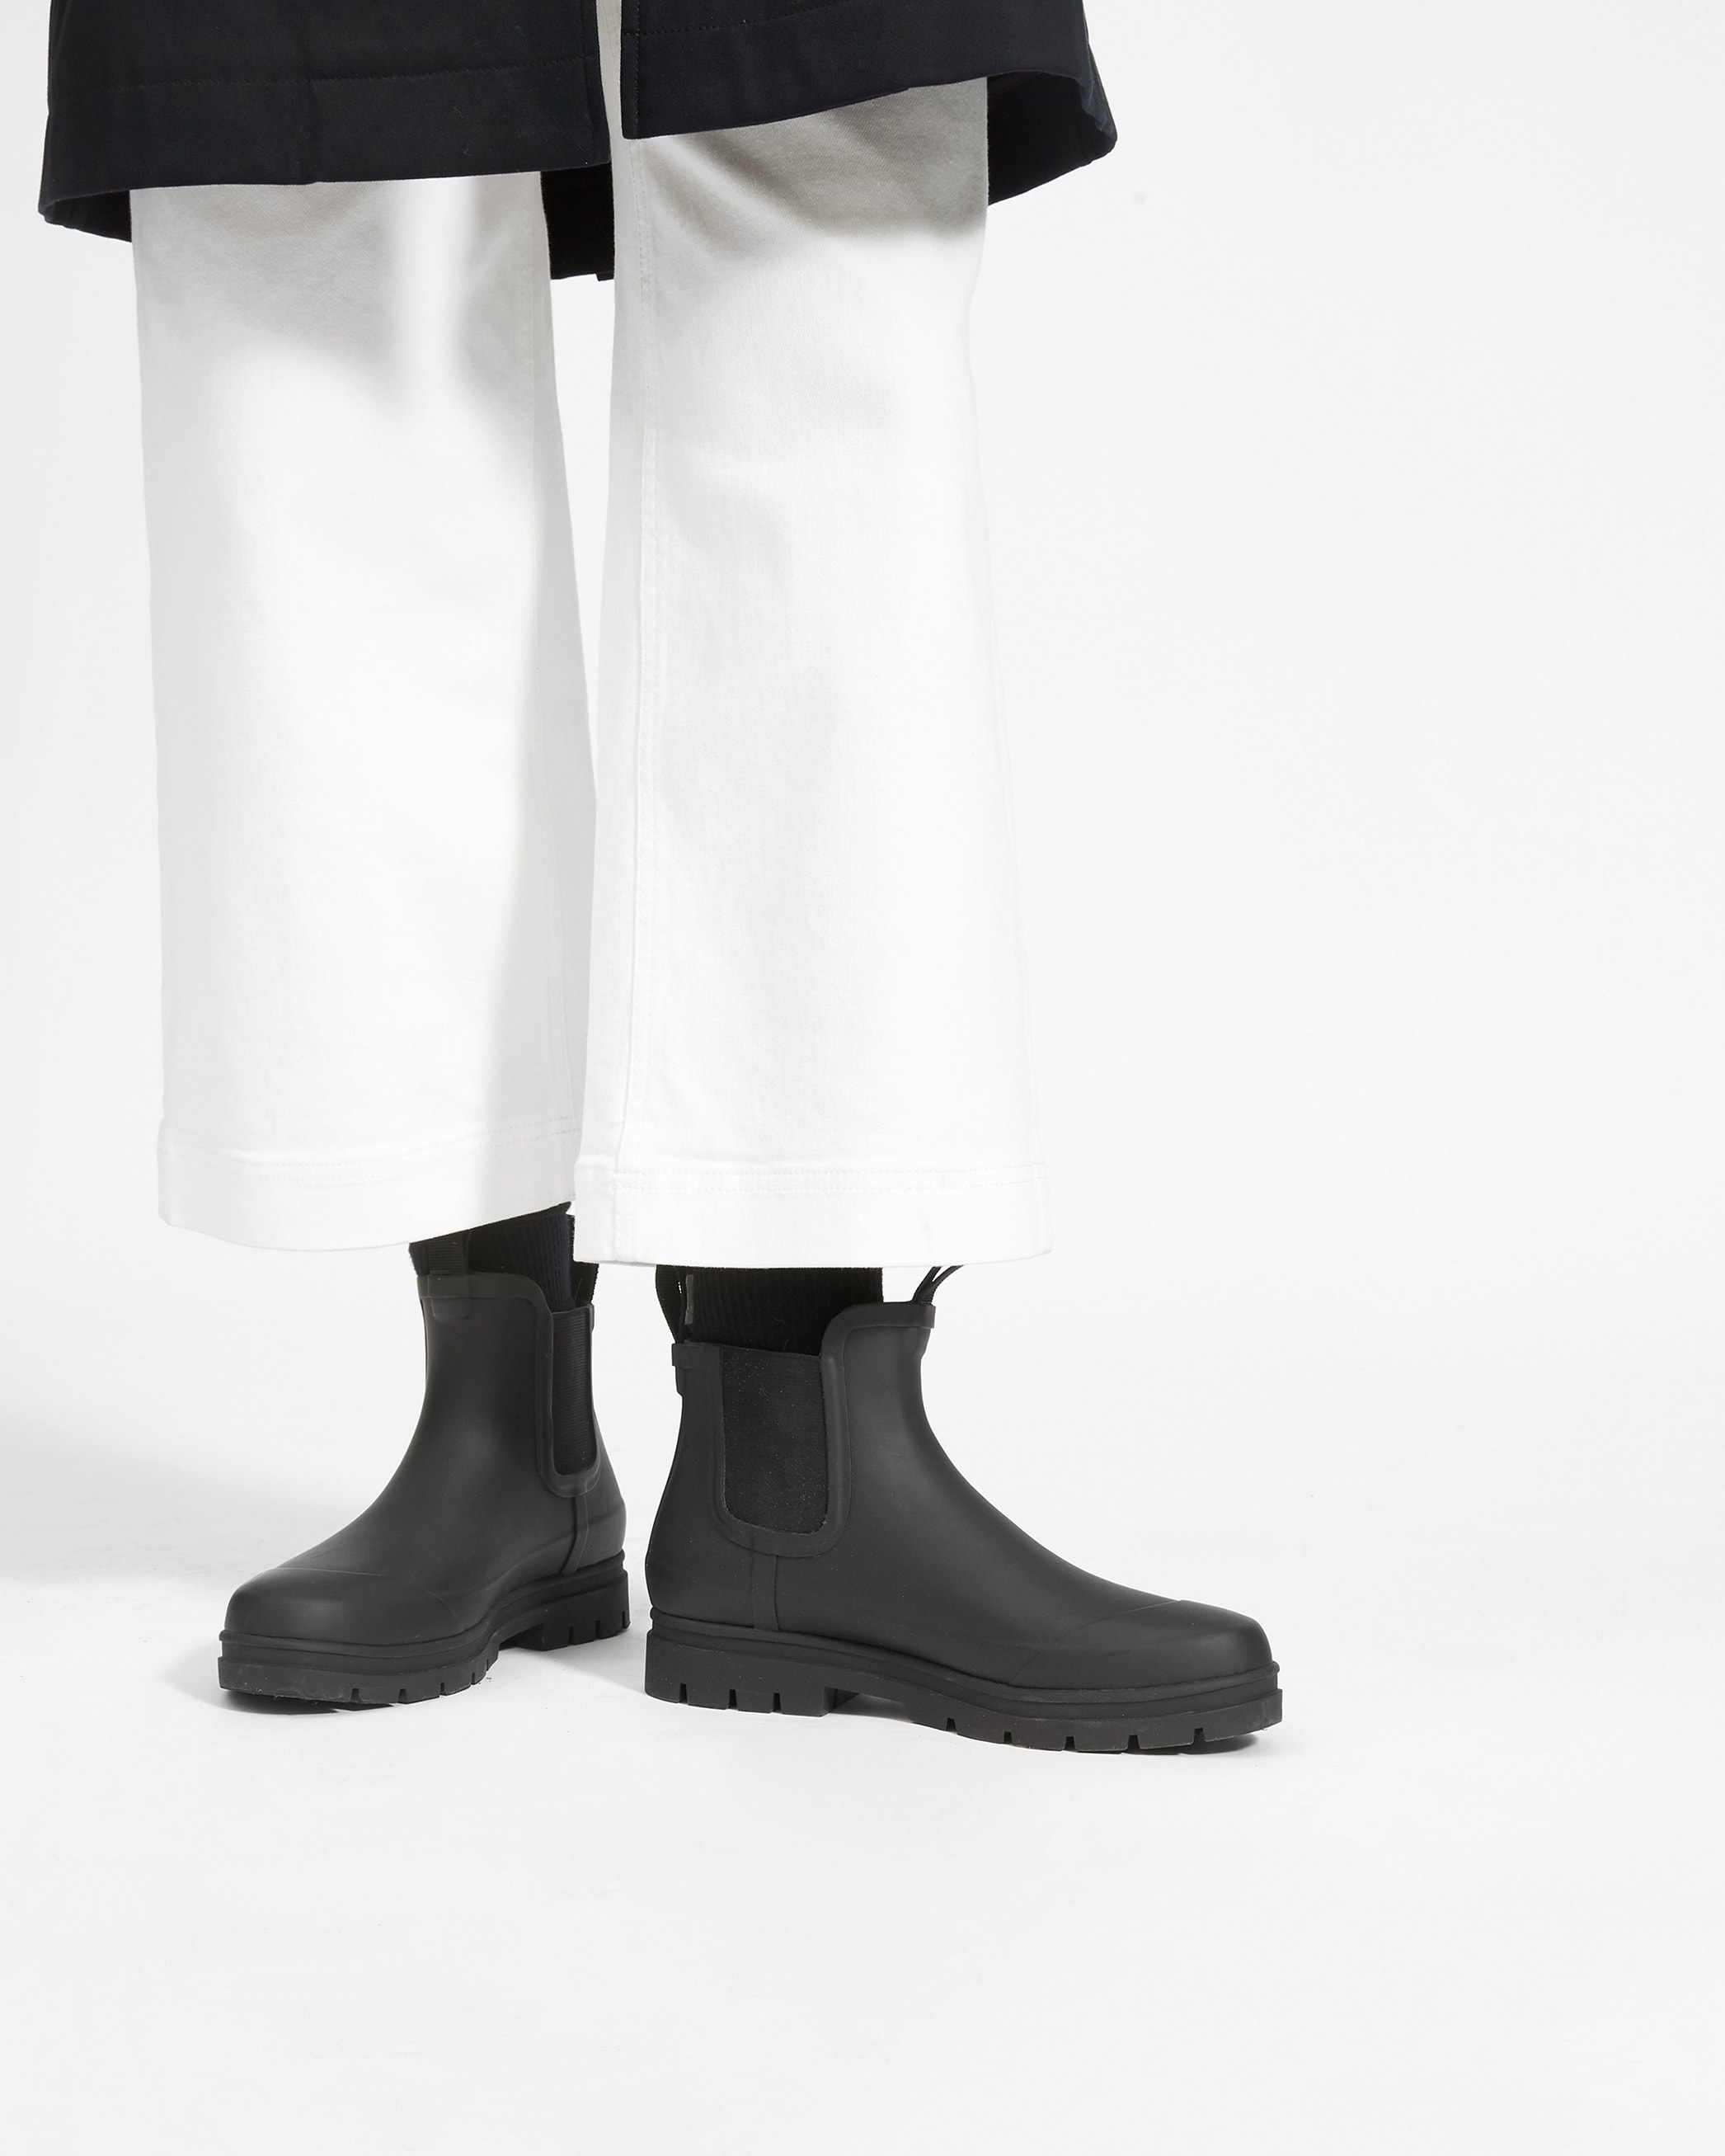 h and m rain boots